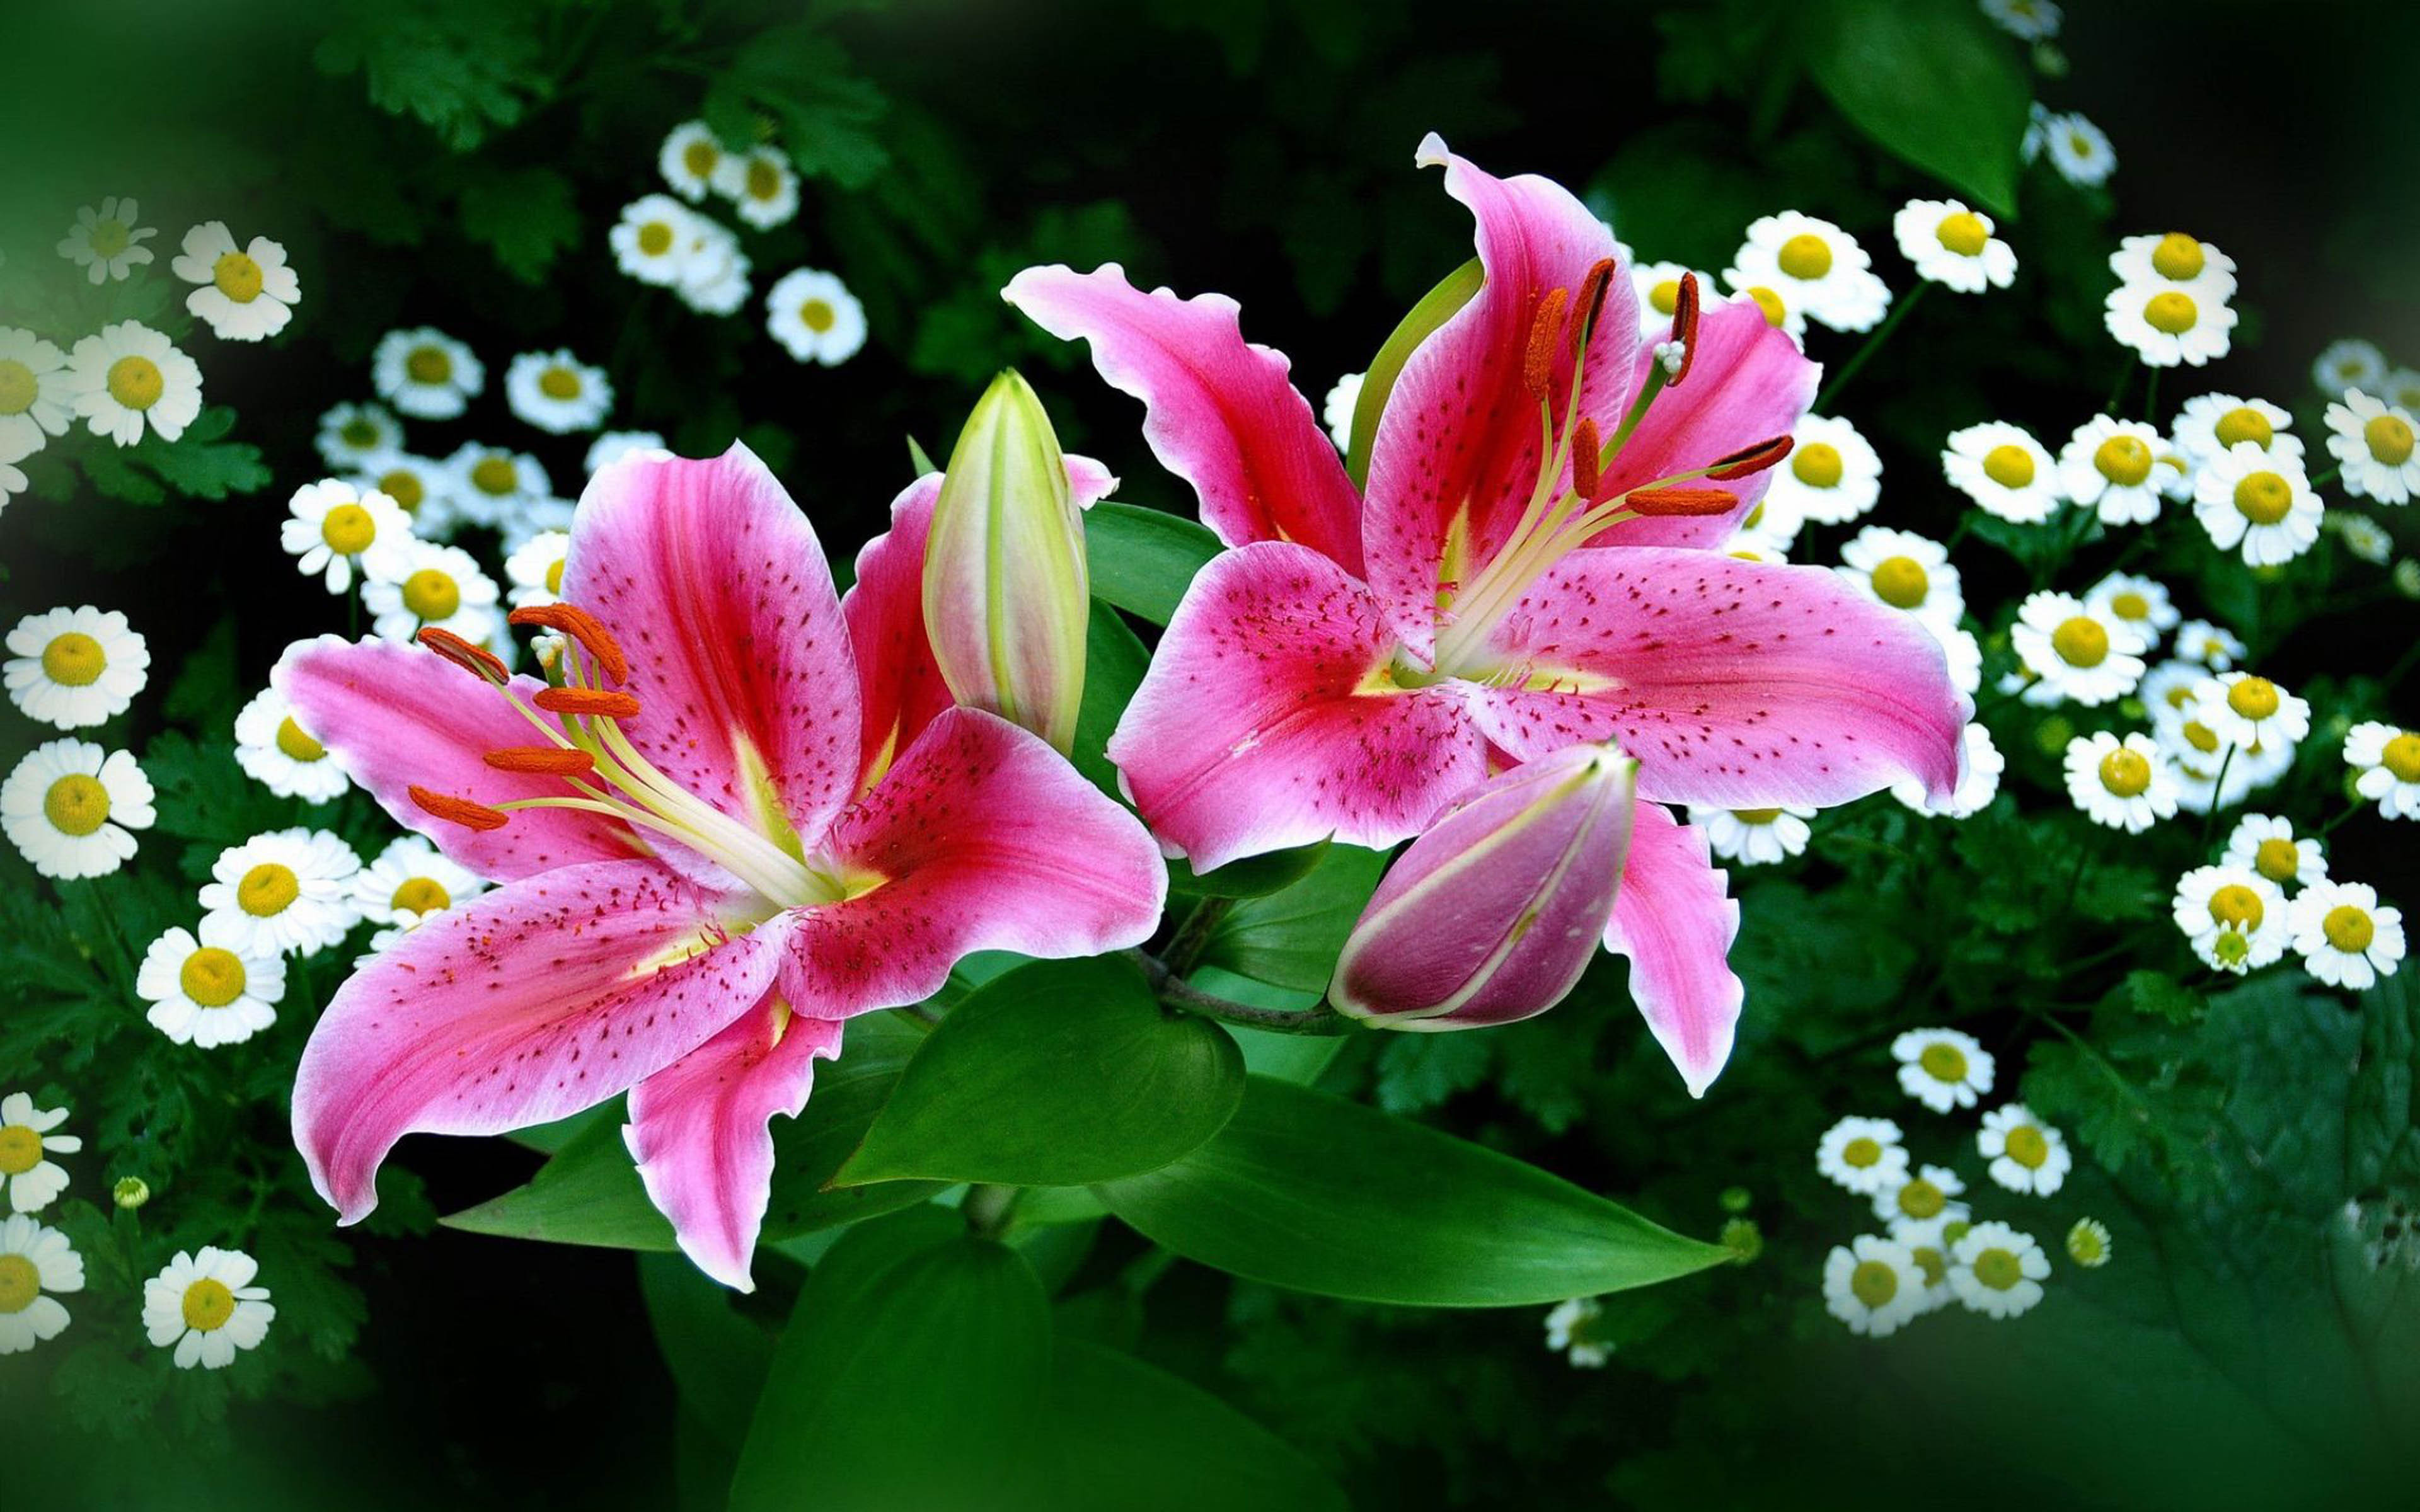 tiger lily flower Lily flowers lilies pink garden desktop wallpapers tiger flowwers nature wallpapers13